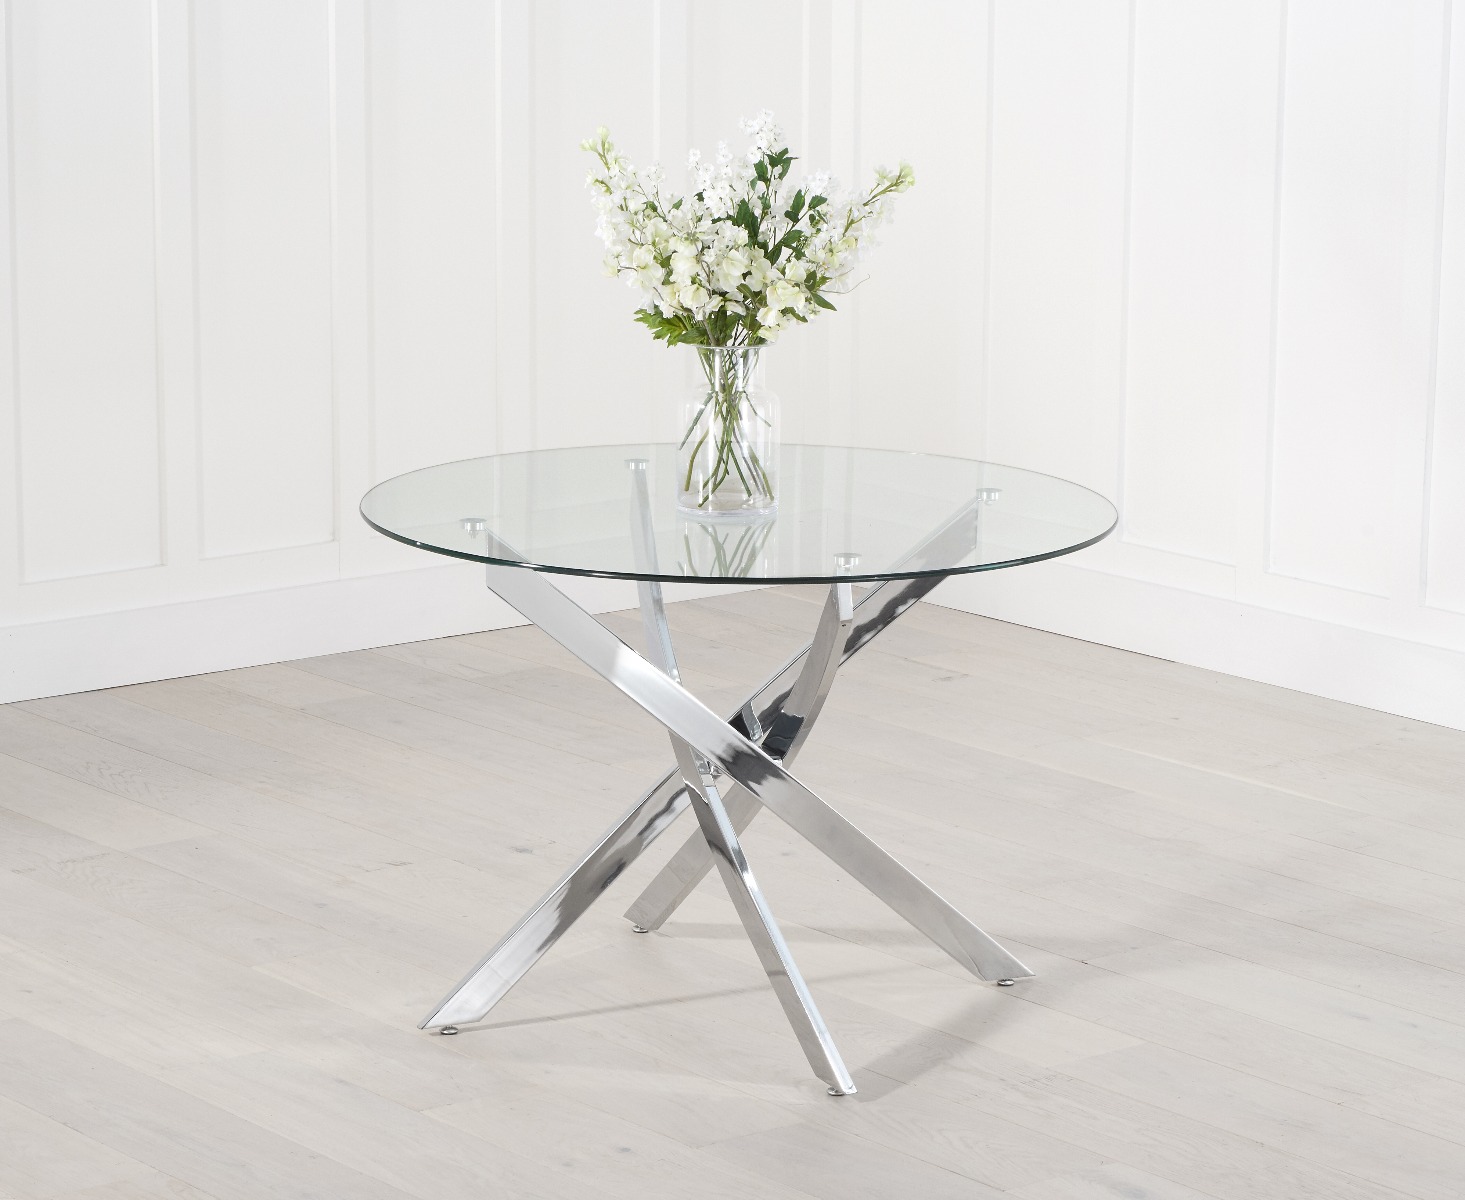 Photo 4 of Denver 110cm glass dining table with 4 grey gianni chairs